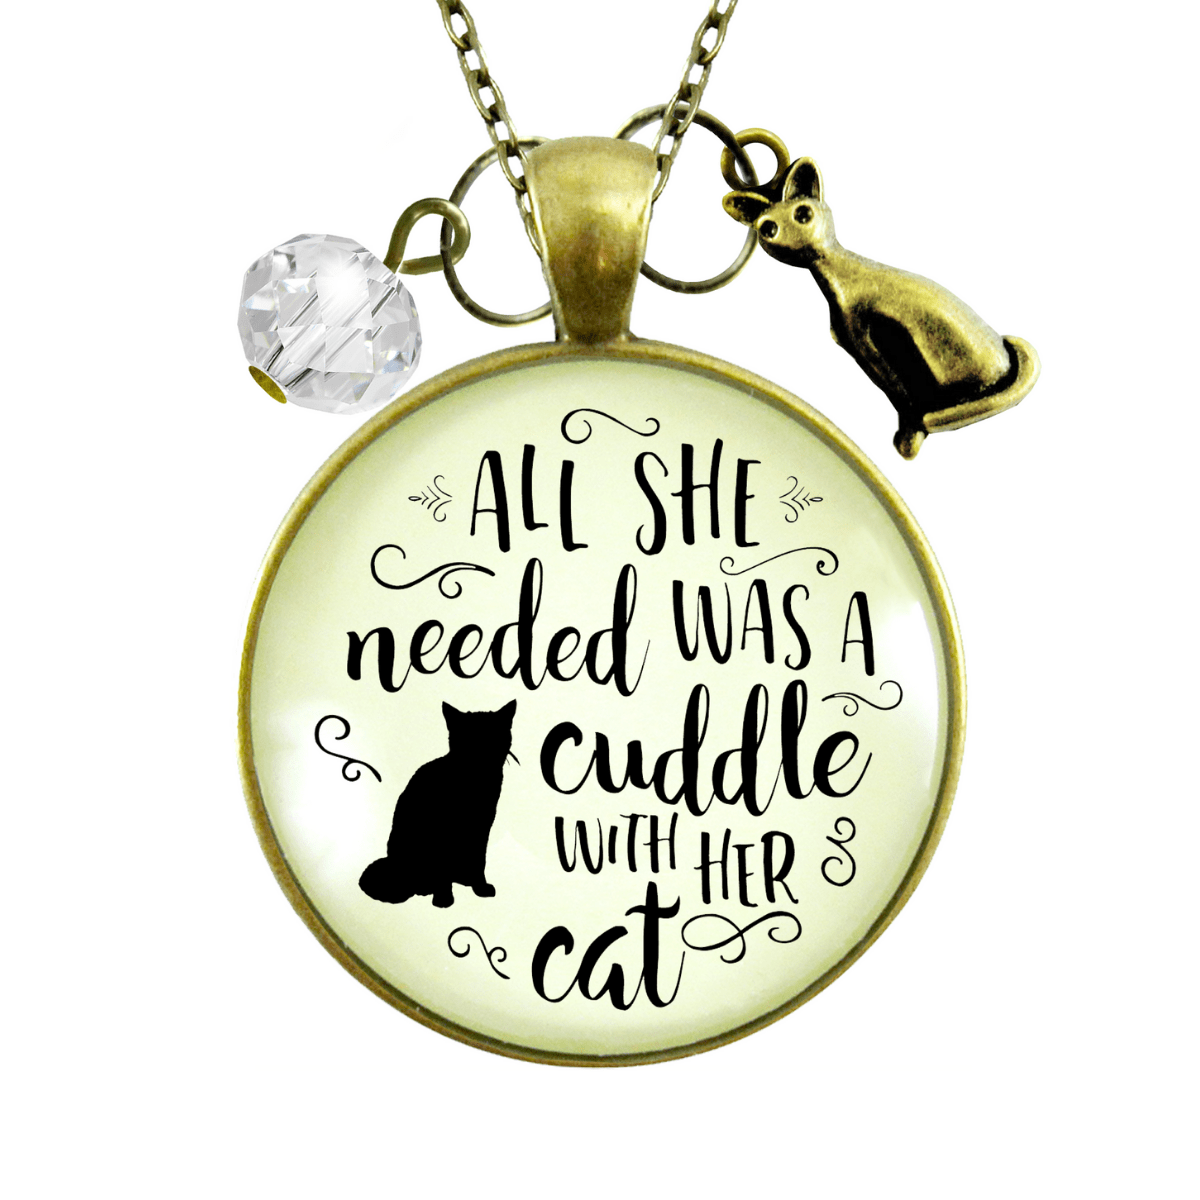 Gutsy Goodness Cat Necklace All She Needed Was Cuddle Gift Quote Kitty Lover Related Cat Jewelry - Gutsy Goodness Handmade Jewelry;All She Needed Was A Cuddle With Her Cat - Gutsy Goodness Handmade Jewelry Gifts